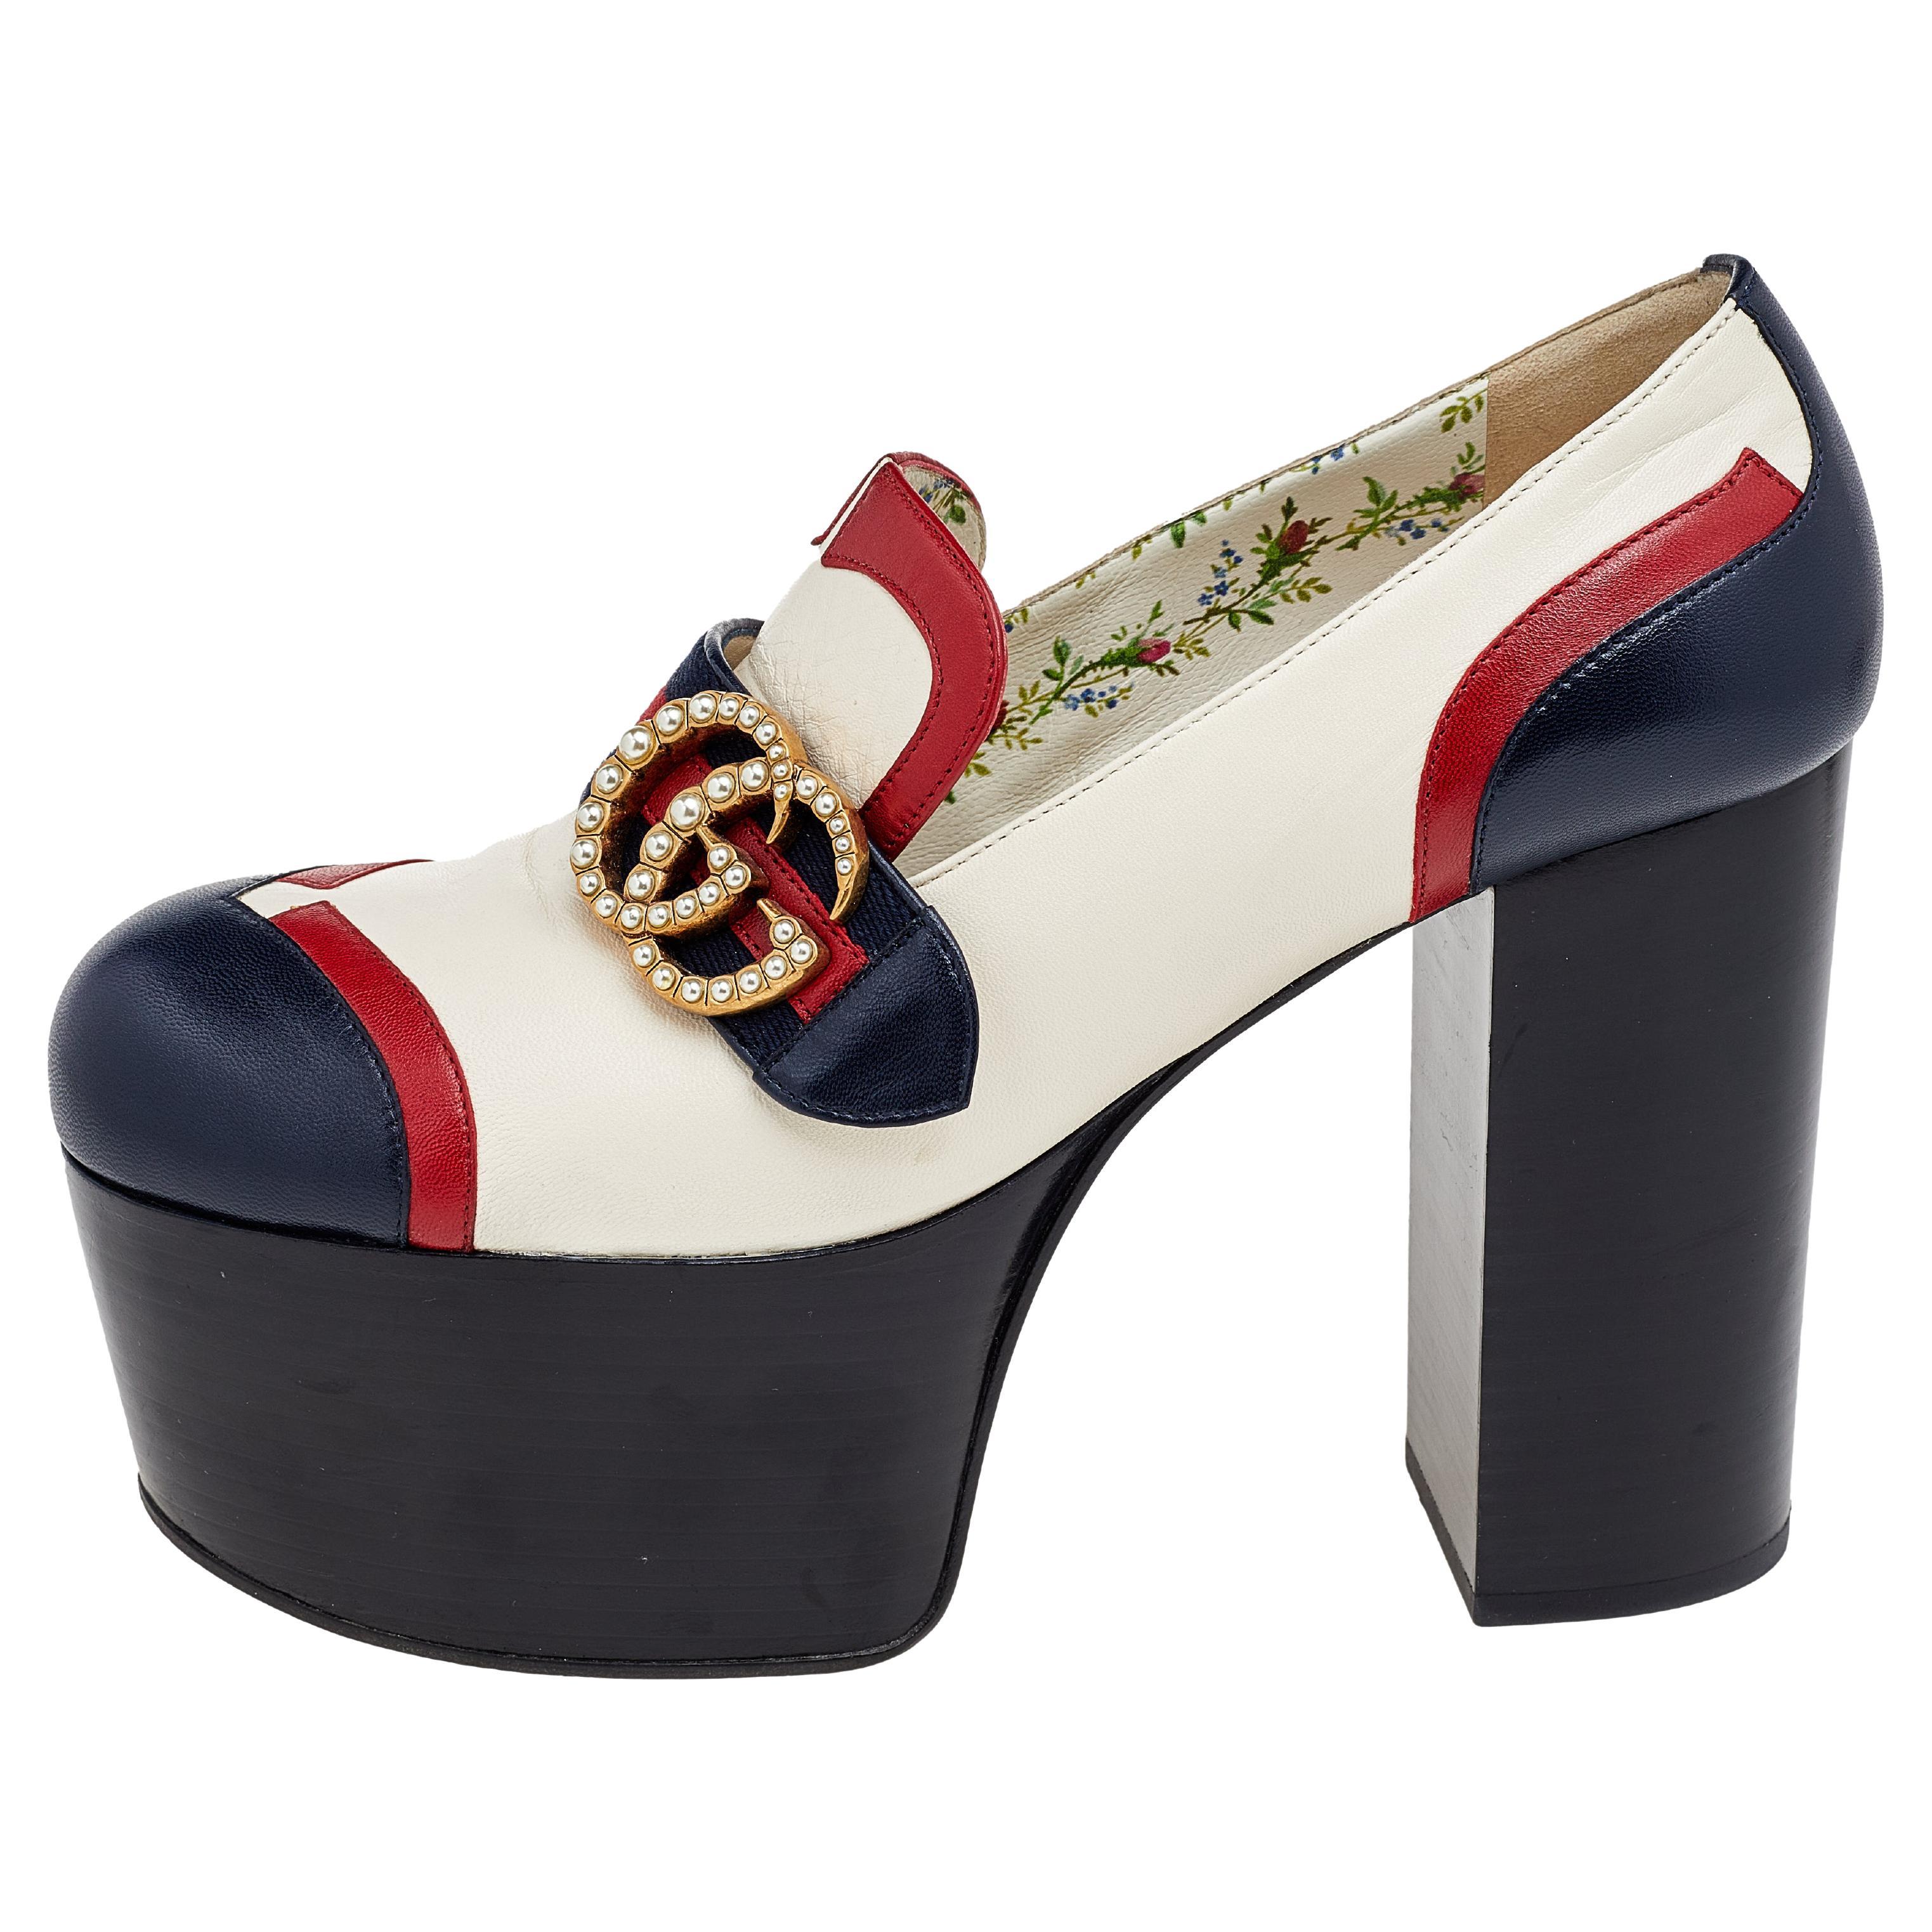 Gucci Multicolor Leather GG Marmont Embellished Block Heel Pumps Size 38